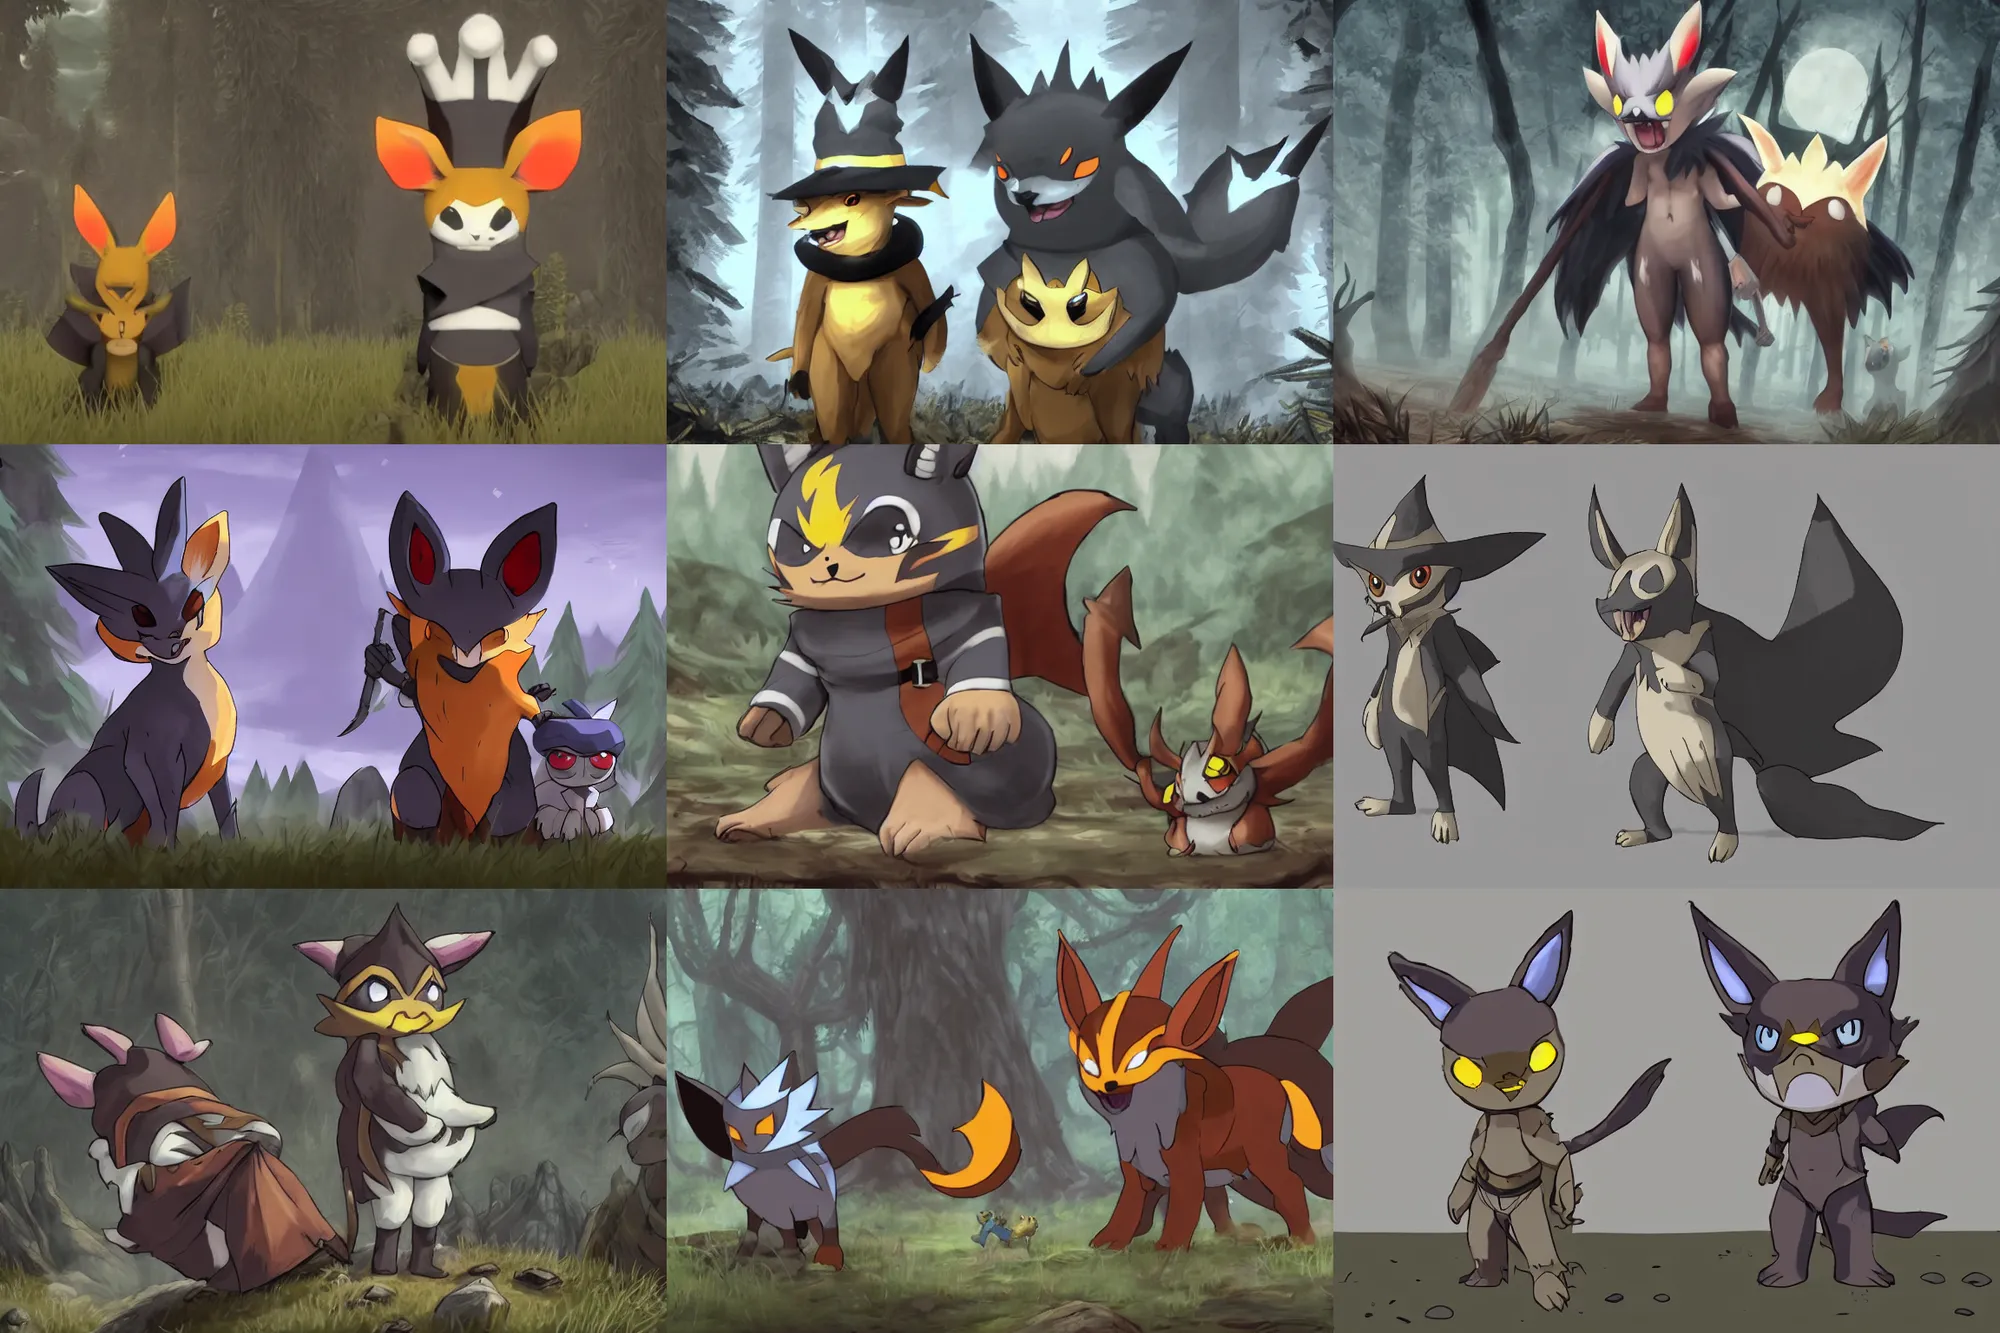 Prompt: trailcam footage grayscale low saturation video game elden clay growlithe : murkrows reprisal star resident evil unreal engine mismagius mystery skyrim dungeon ultrahd resident eevee wearing bandanna standing in front of giratina, maidenless wearing witch hat pokemon nextgen